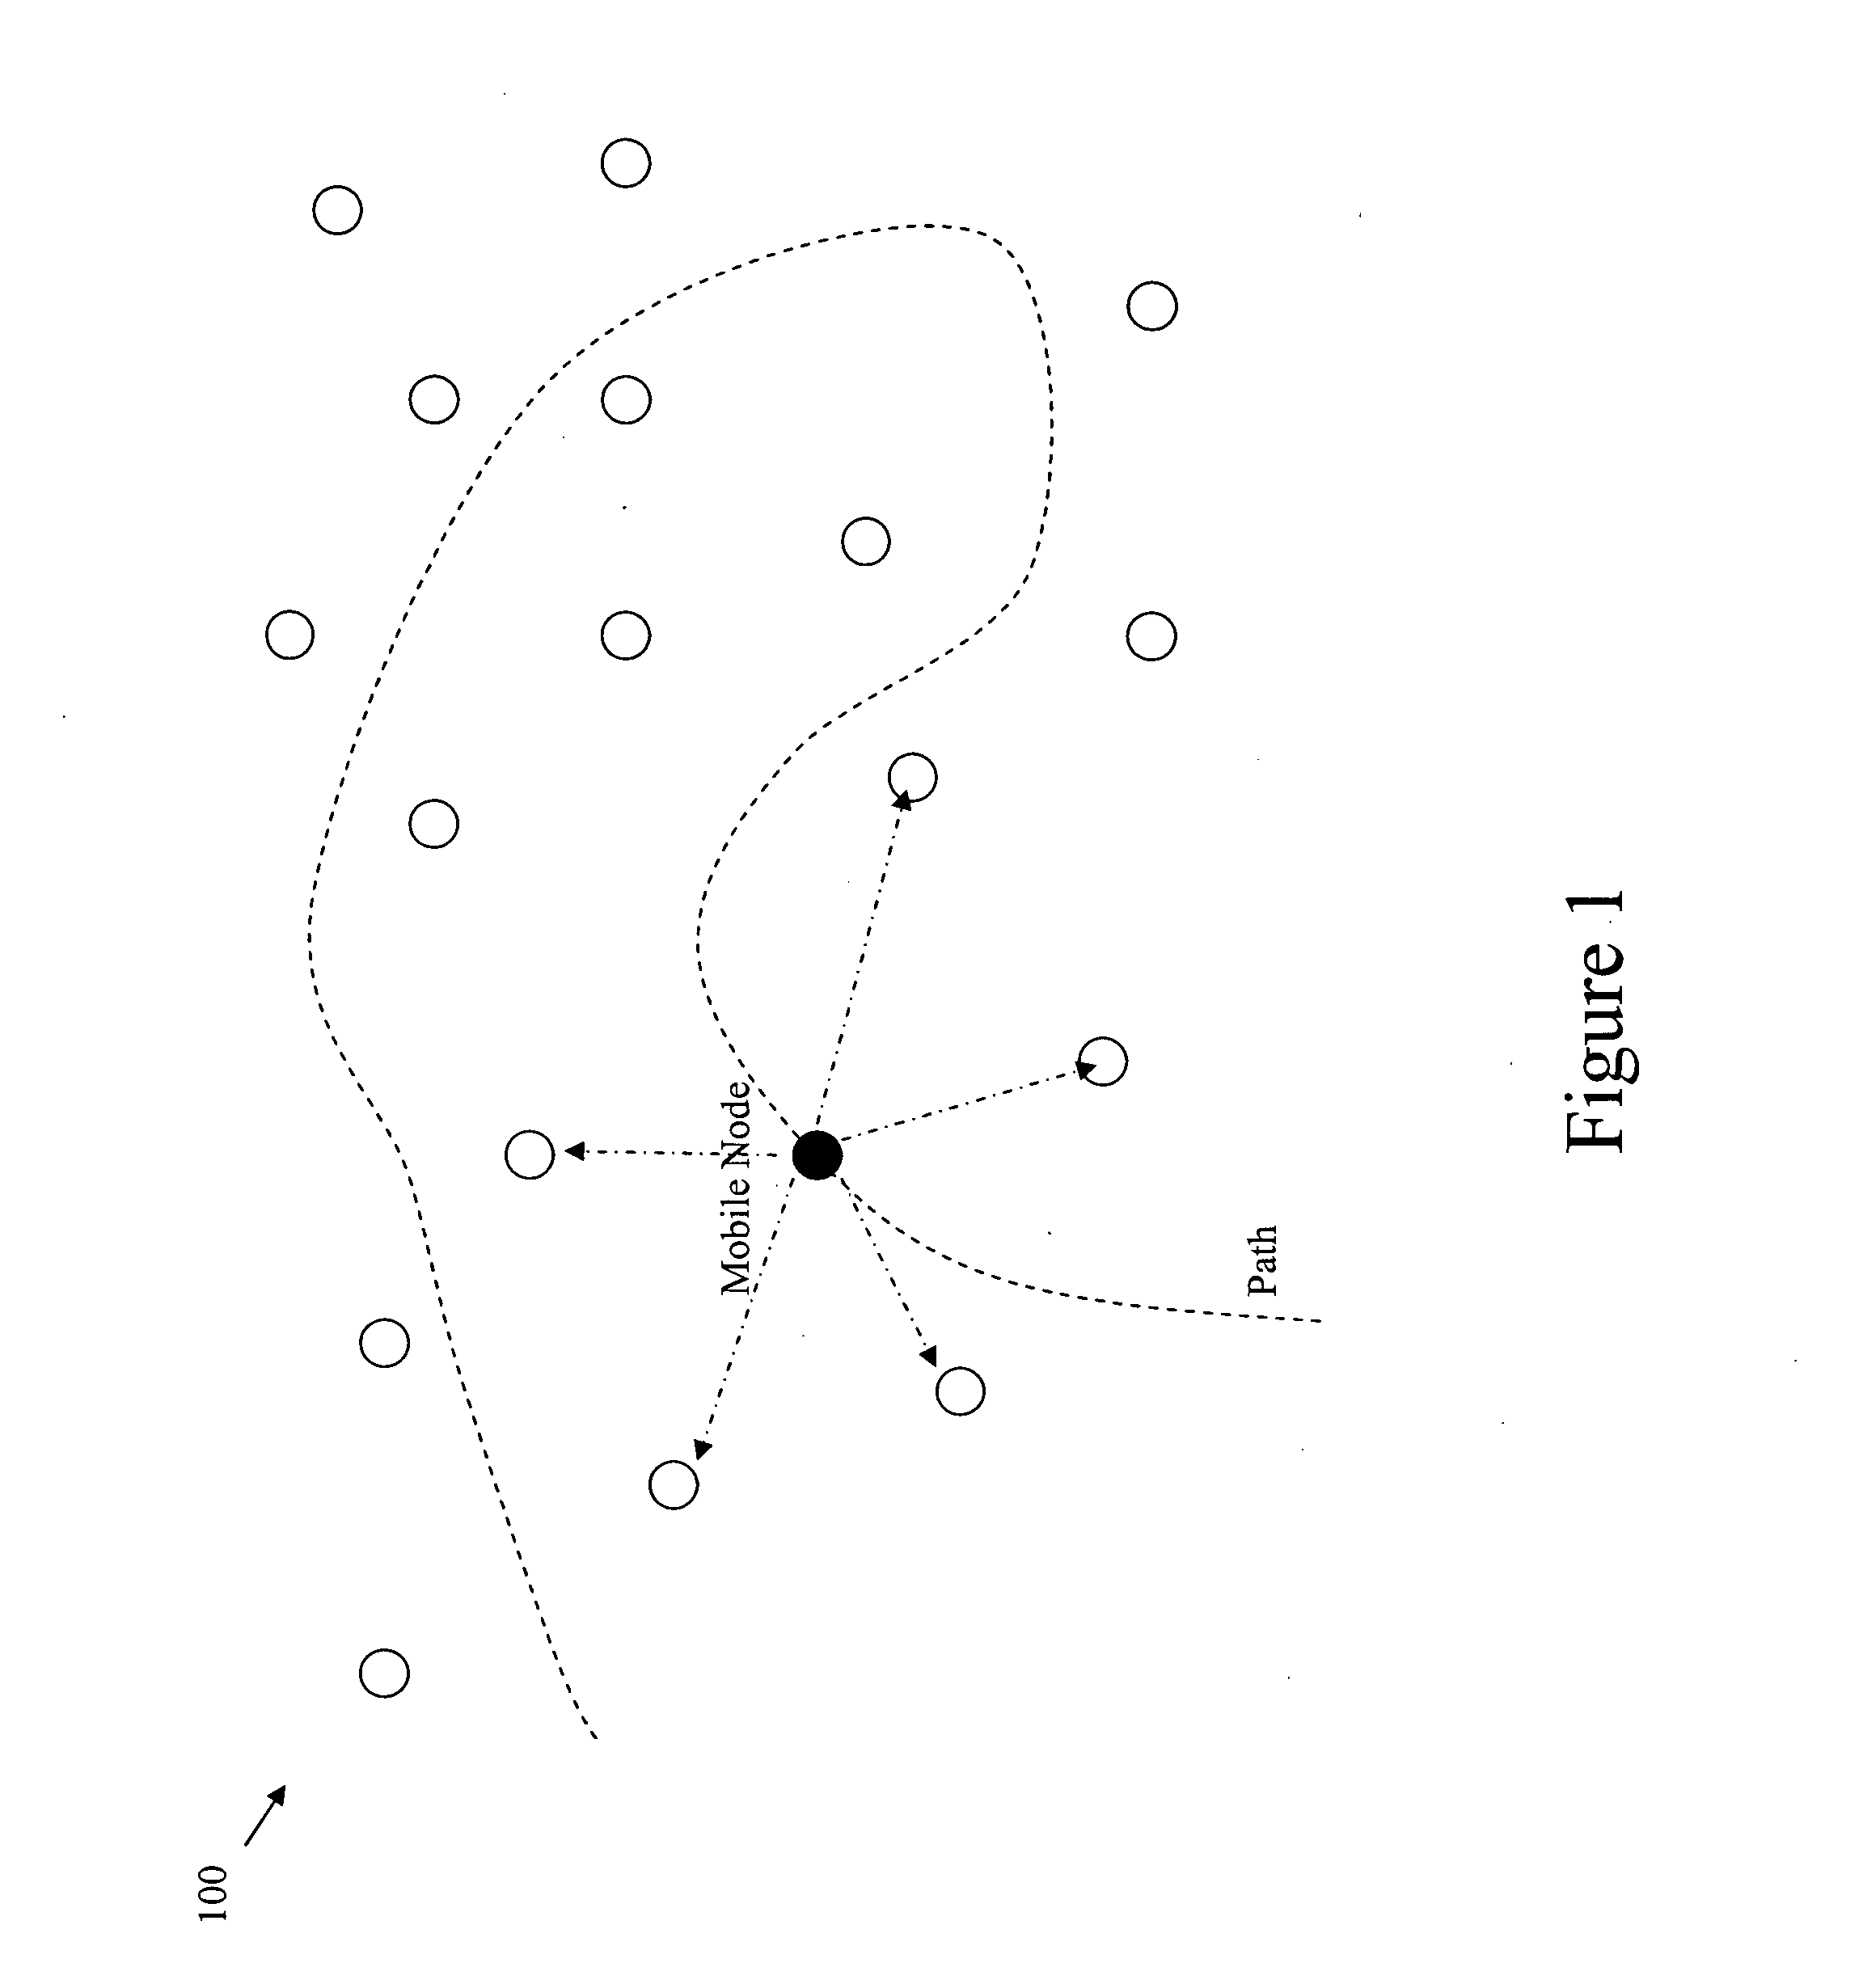 System and method to perform network node localization training using a mobile node